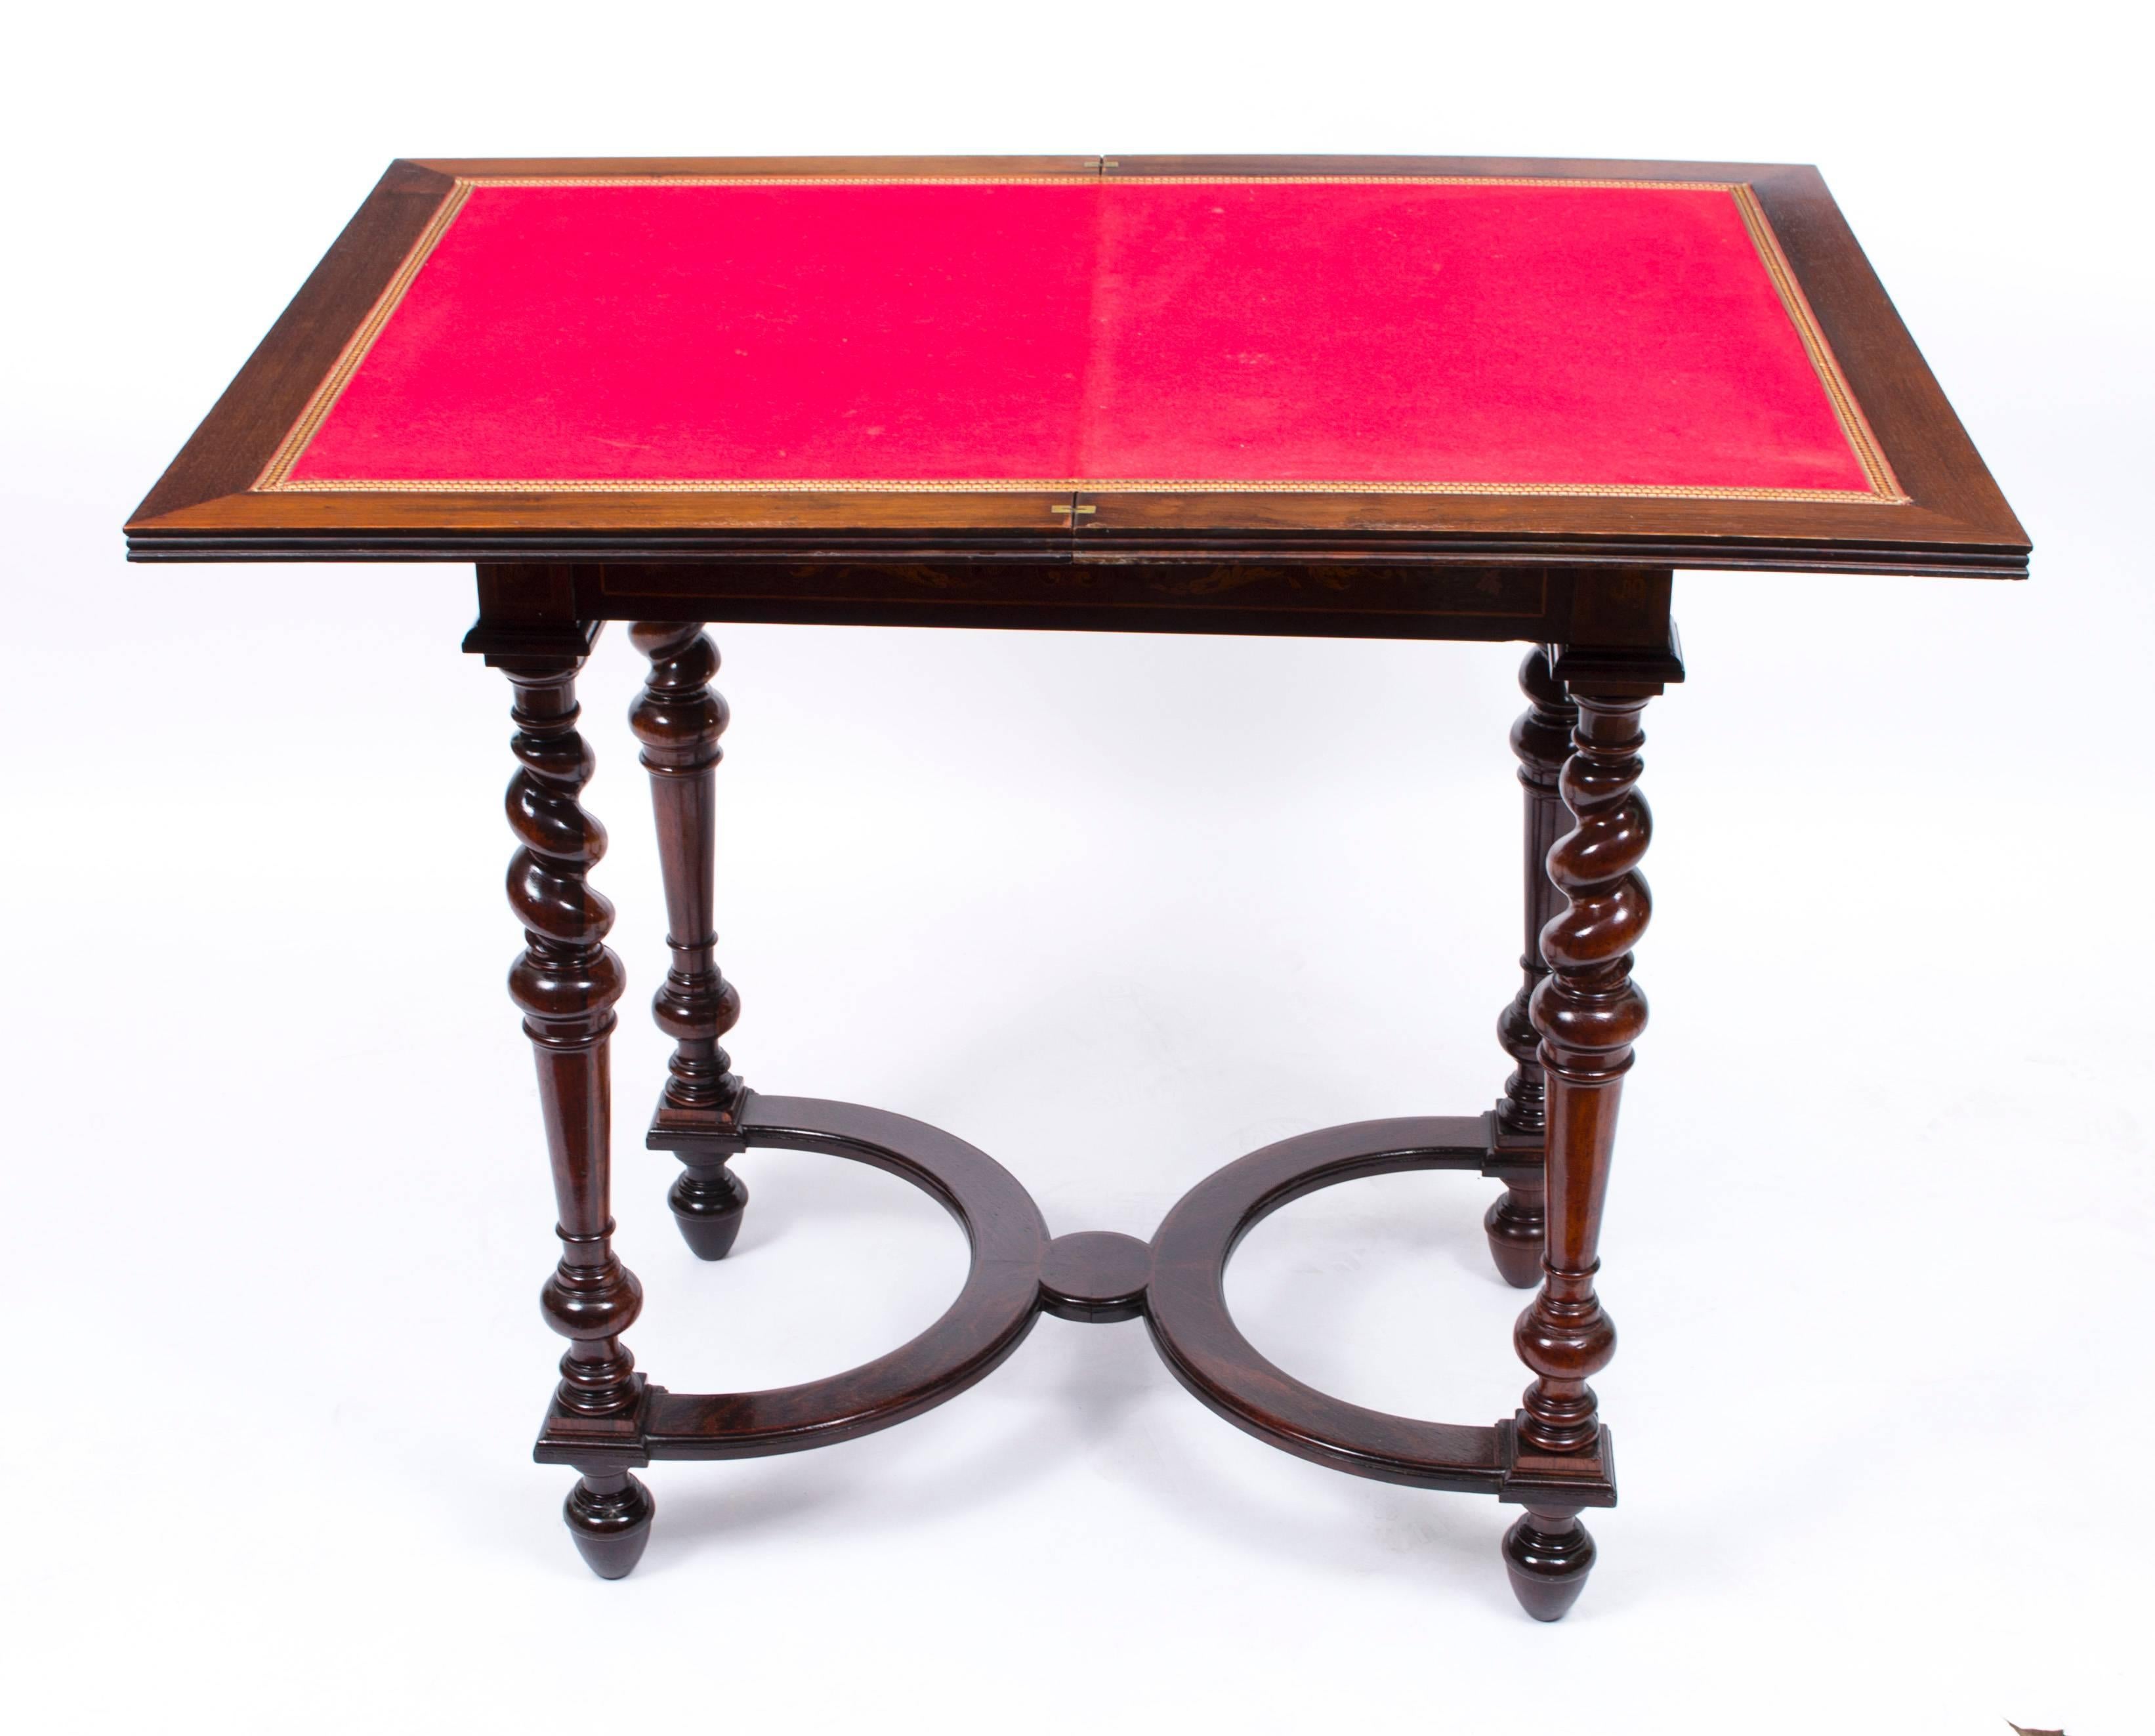 This is an important antique French marquetry card table, circa 1890 in date.

The craftsmanship and finish are second to none and the table is made from rosewood, mahogany and satinwood and features exquisite floral marquetry decoration. The card